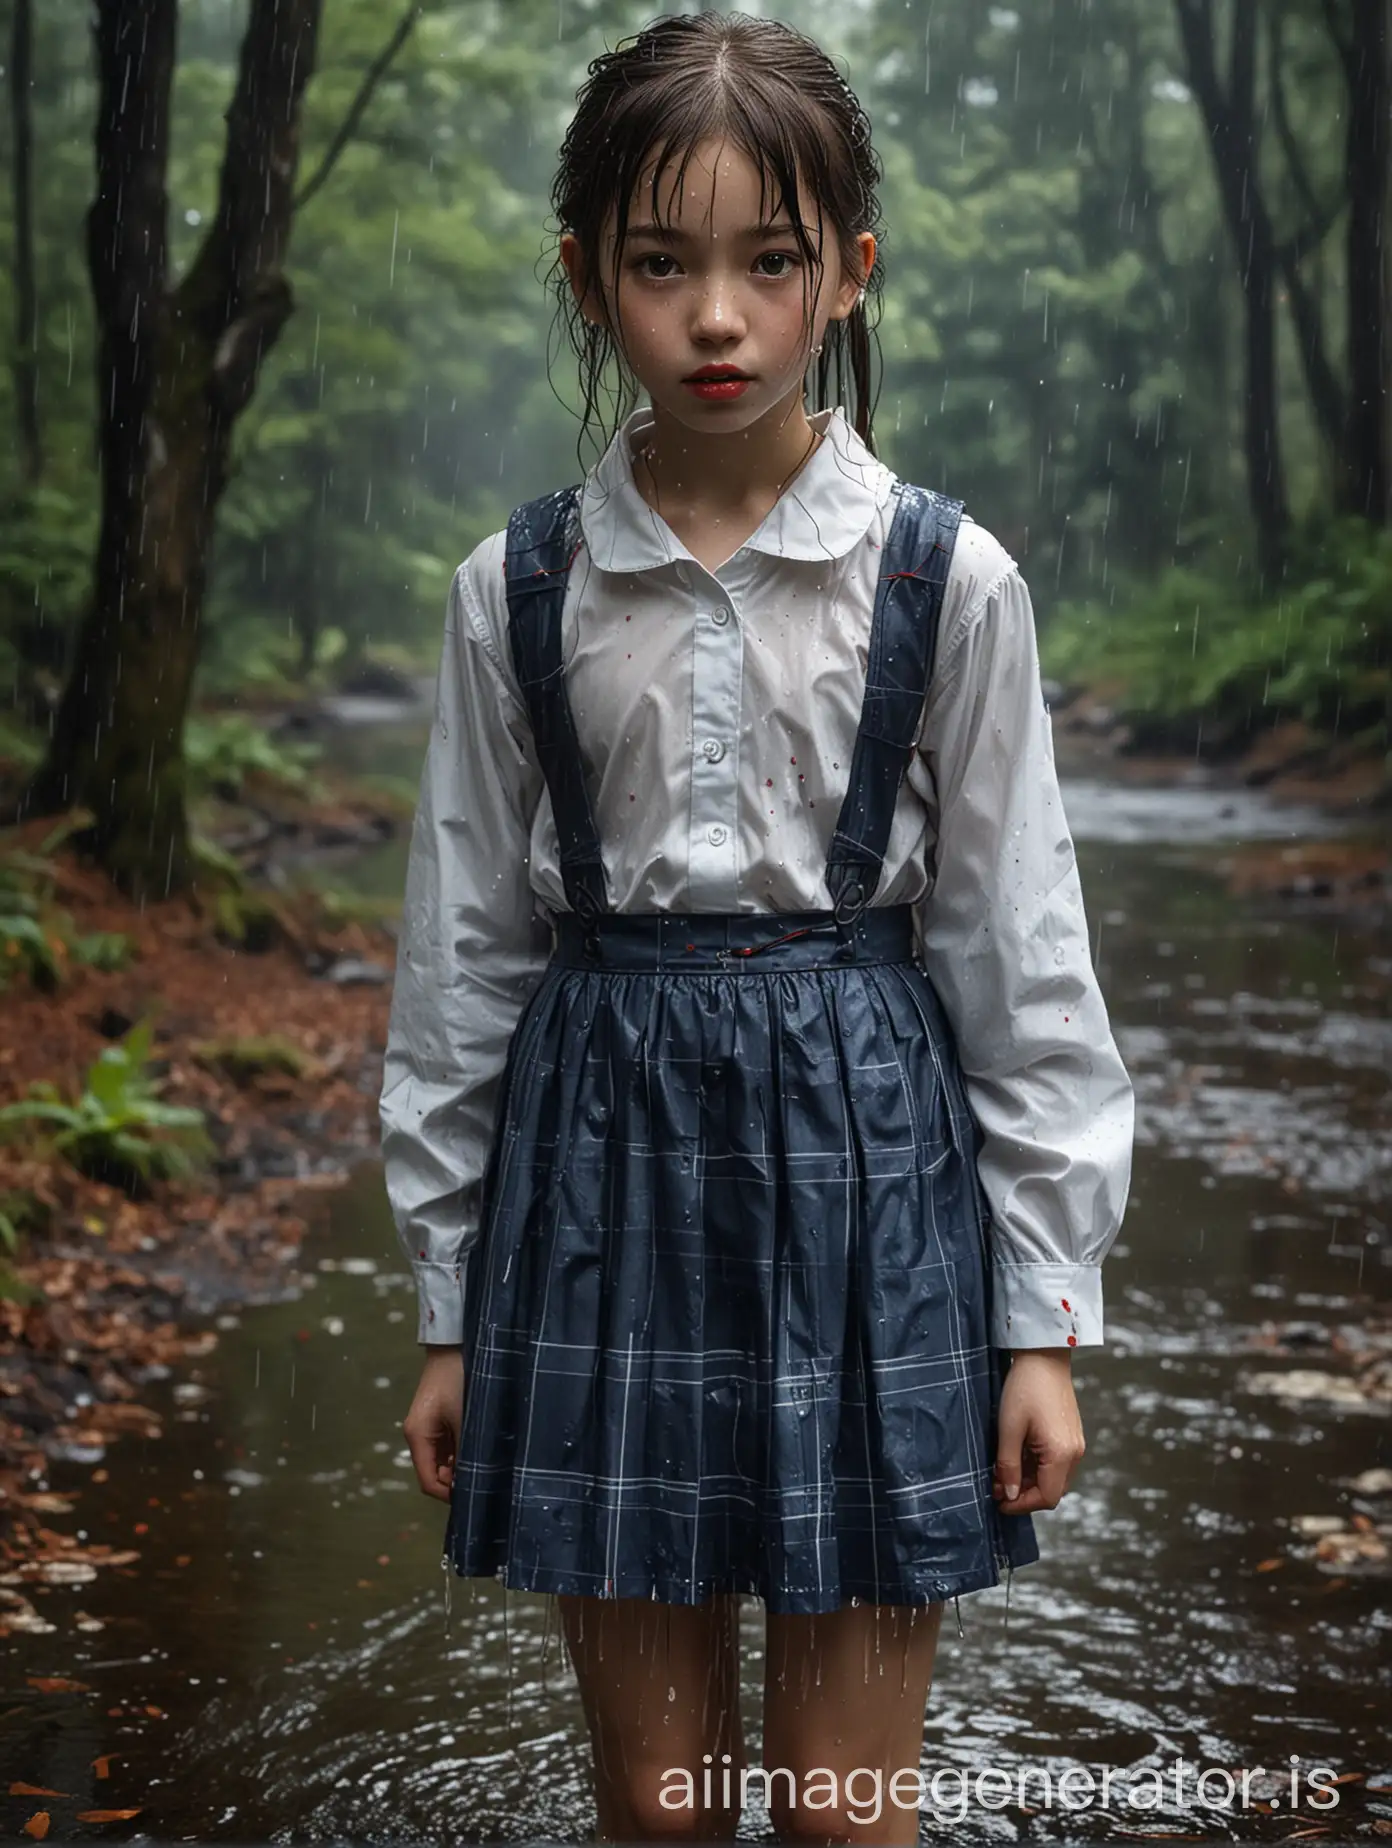  A high-quality, hyperrealistic image shows a young Caucasian-looking girl with Japanese features, around 10 years old, appearing very slim. Her entire body, including her short, wet hair and traditional Japanese school uniform, is soaked from head to toe after stepping out of a forest lake in the rain. Visible droplets of water and rain create a reflective effect on her clothing, especially her shiny white blouse, blue-plaid skirt, knee-high socks, and blue-and-white striped pinafore.

Despite the heavy rain, she doesn't seem to mind the cold weather as her lips are painted with vibrant red lip gloss, making them look glossy and full. Her dark brown eyes are wide open, giving her an innocent and curious appearance. A large, wet, red satin ribbon is tied in her hair, contrasting with her pale skin.

The image's focus is on the girl's wet clothes and overall drenched appearance, which stands out against the dark and rainy forest backdrop. The picture emphasizes the realism of the water droplets clinging to her uniform, making her look like a living version of a character from an animated movie.